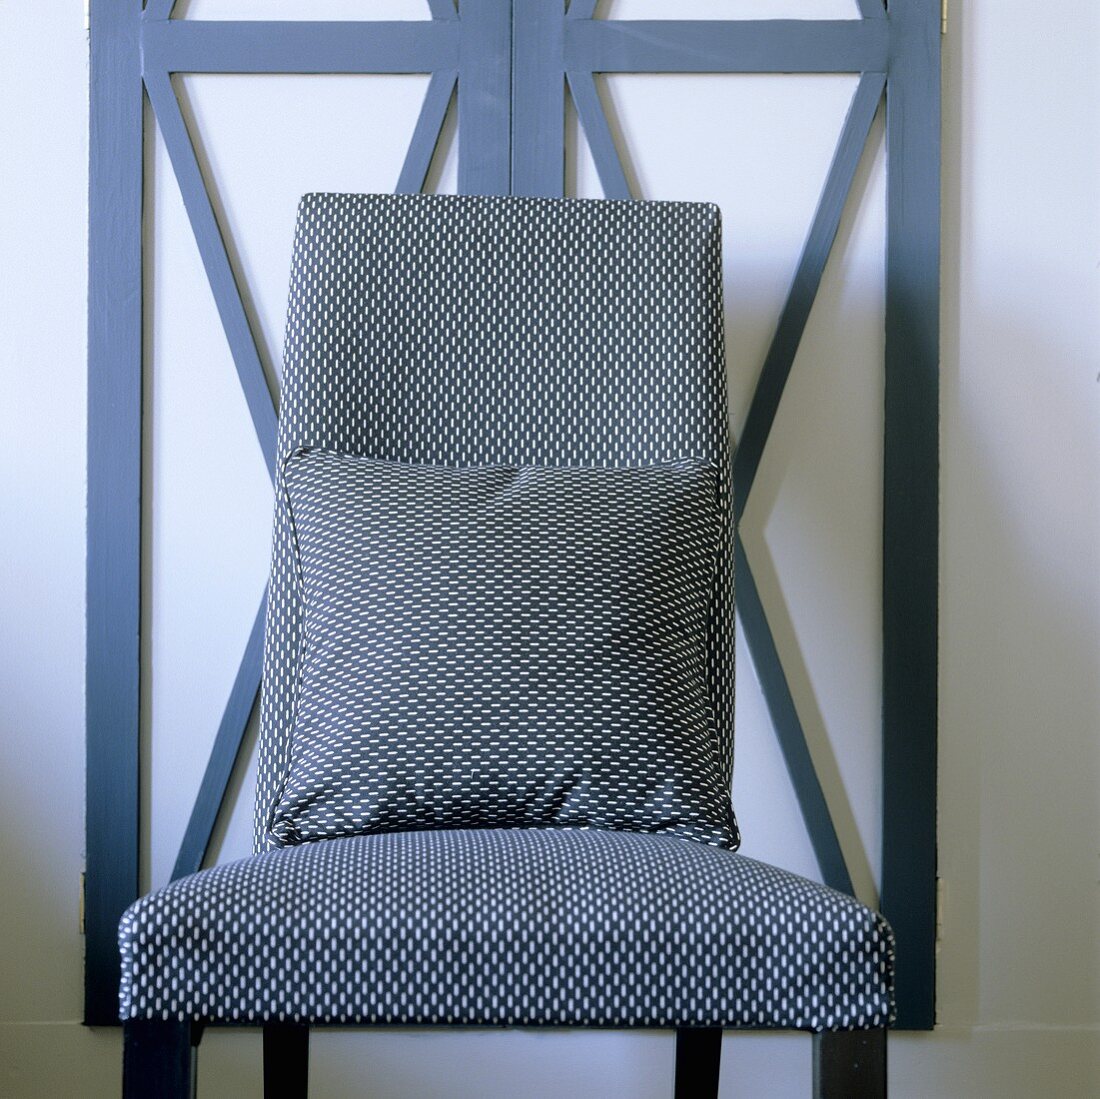 An upholstered chair with a matching cushion